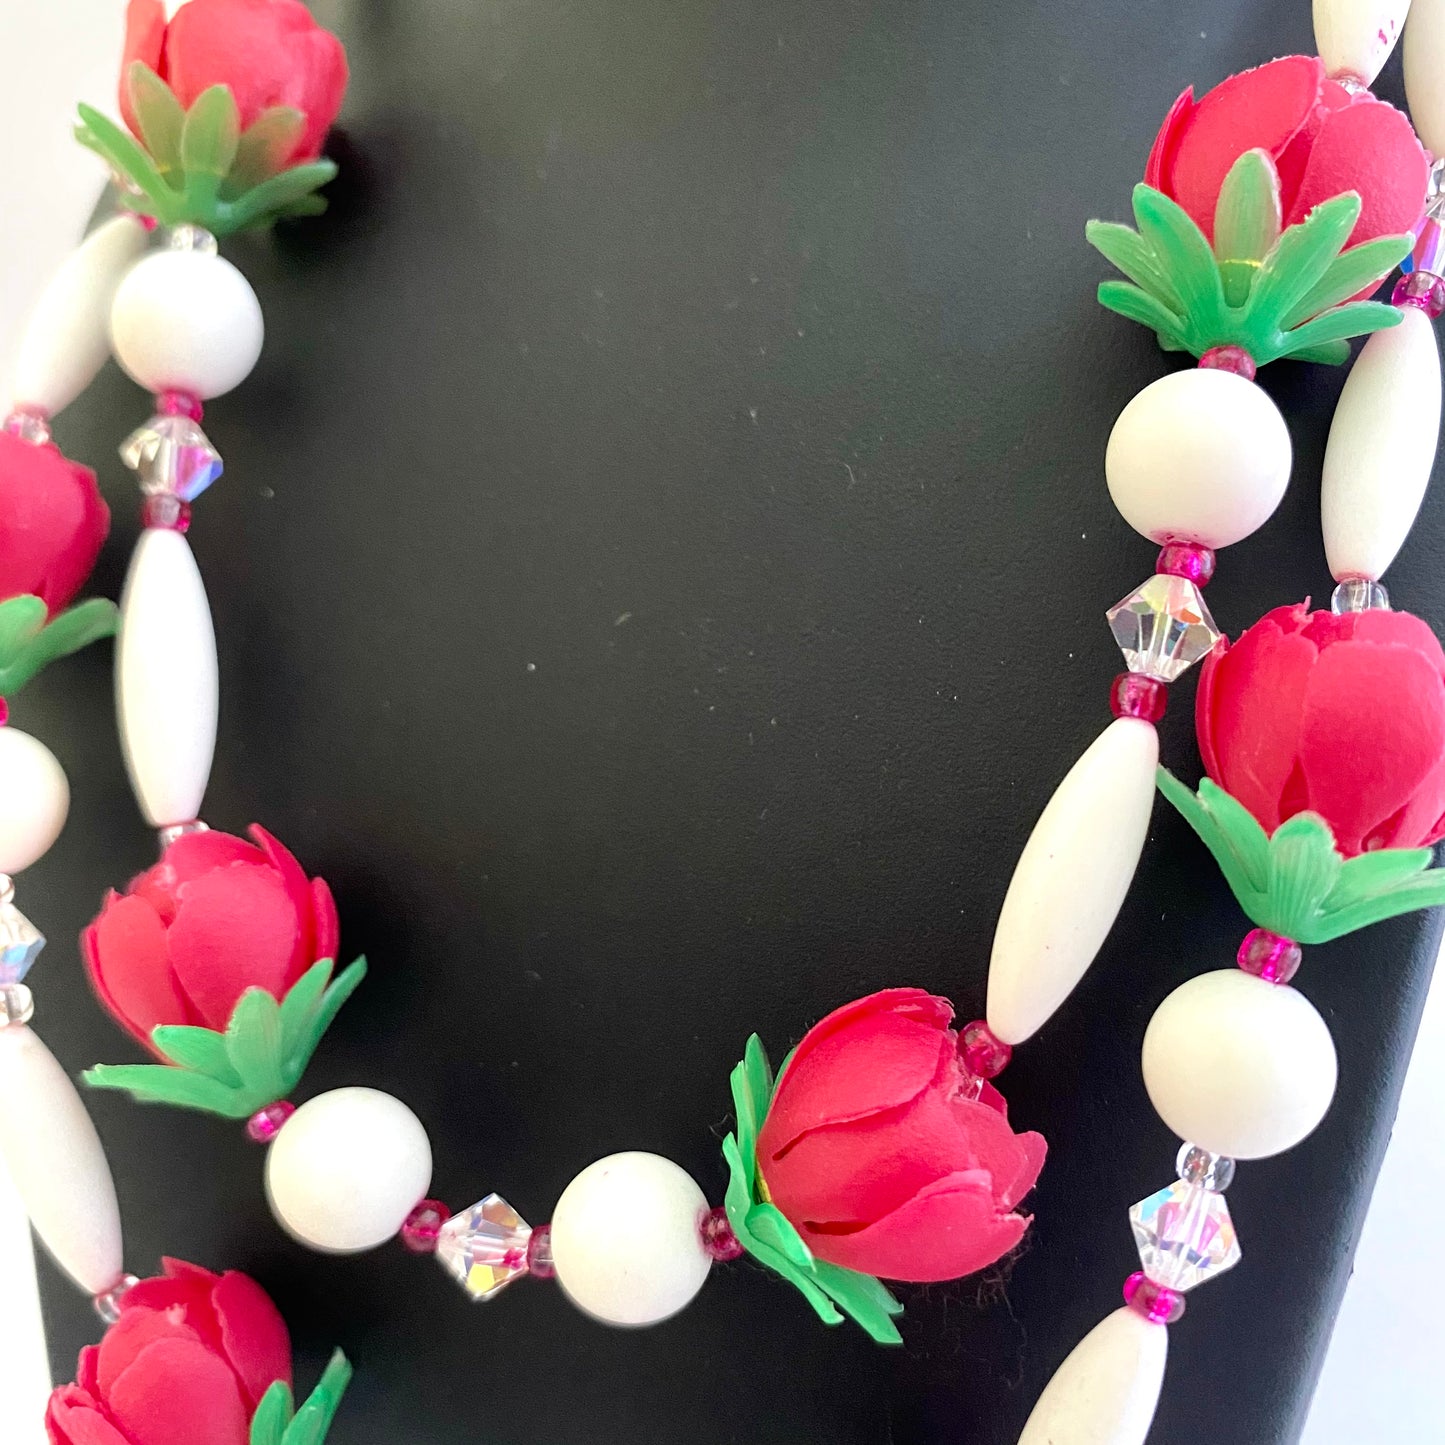 1960s Red & White Novelty Bead Choker Necklace